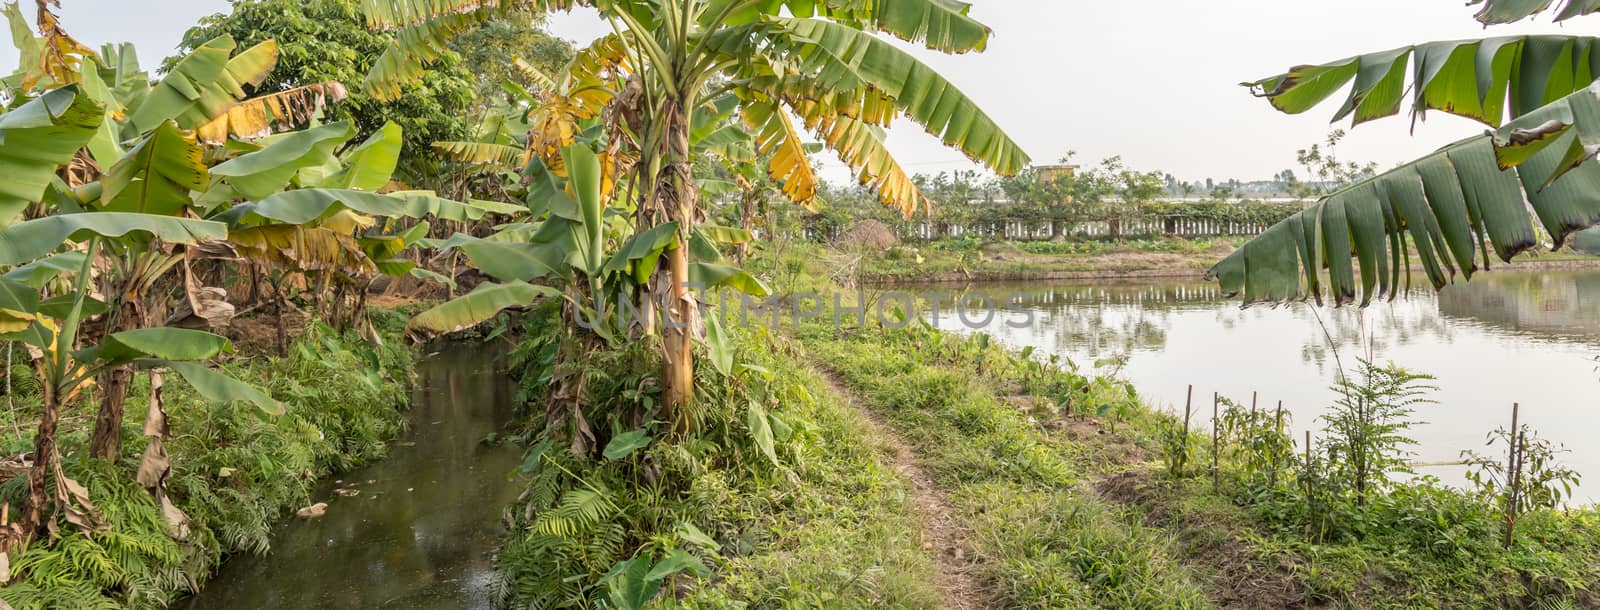 Panoramic view agricultural plantation at countryside of Vietnam with banana trees and pond by trongnguyen